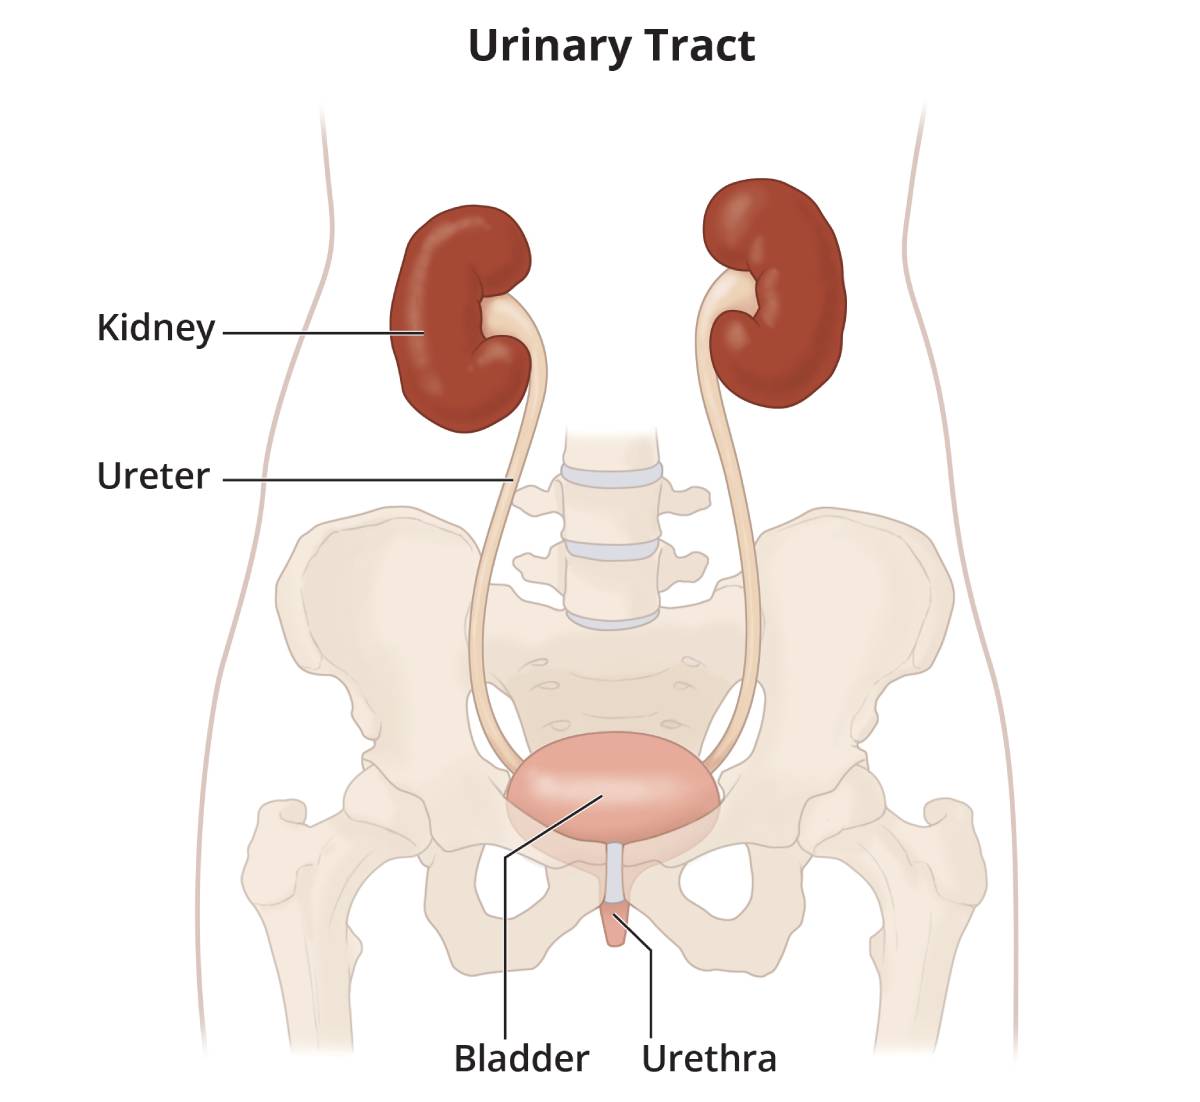 Urinary tract, which includes the kidneys, ureters, bladder, and urethra.